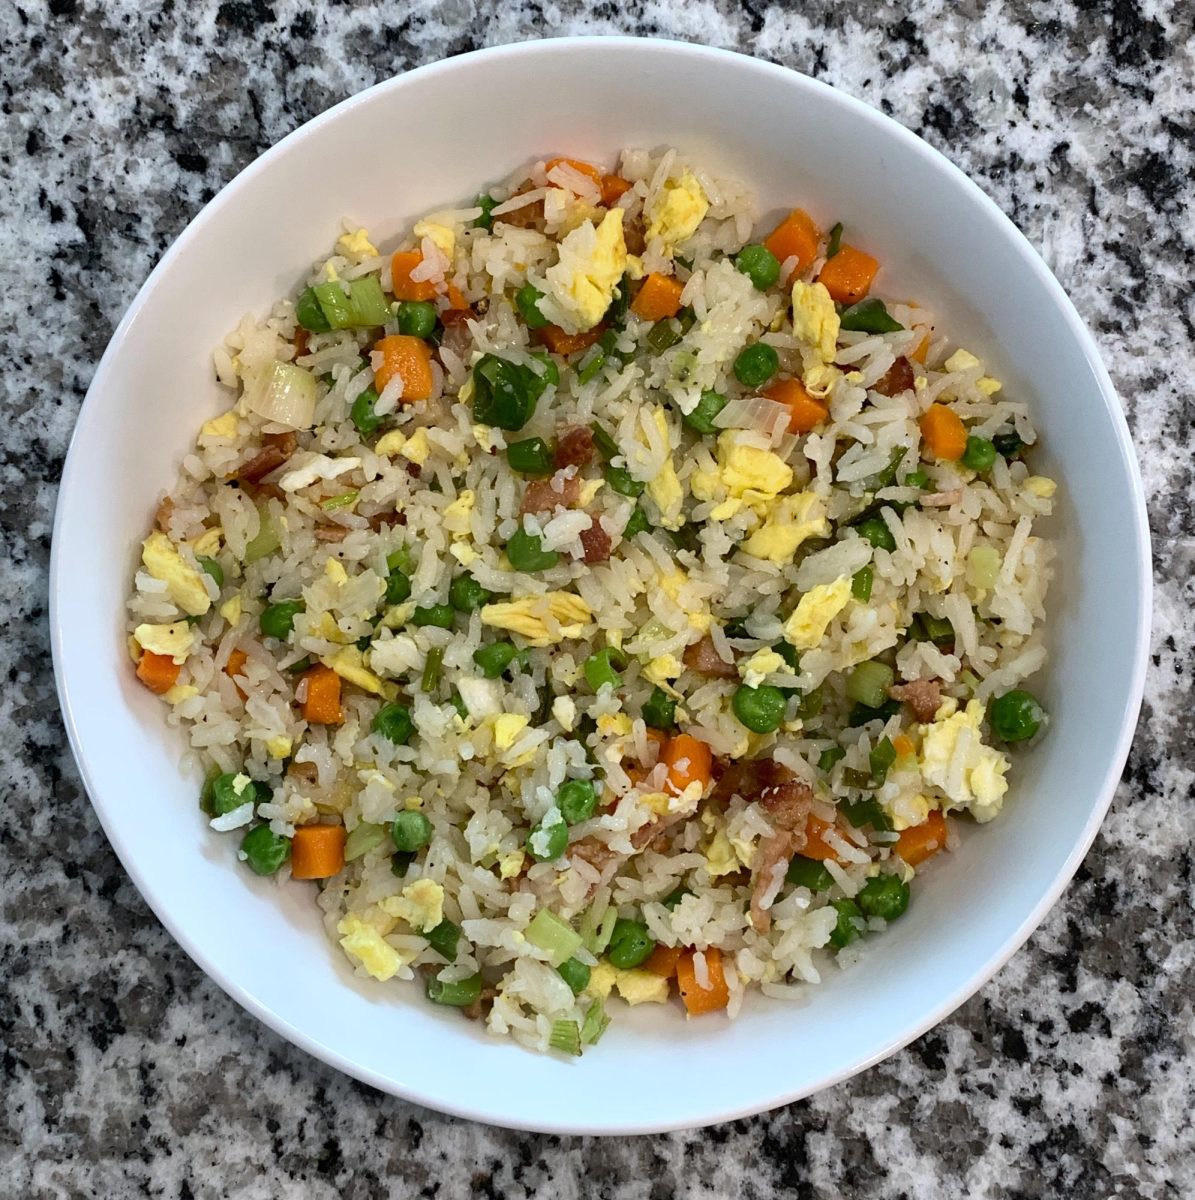 Fried+rice+prepared+at+home.